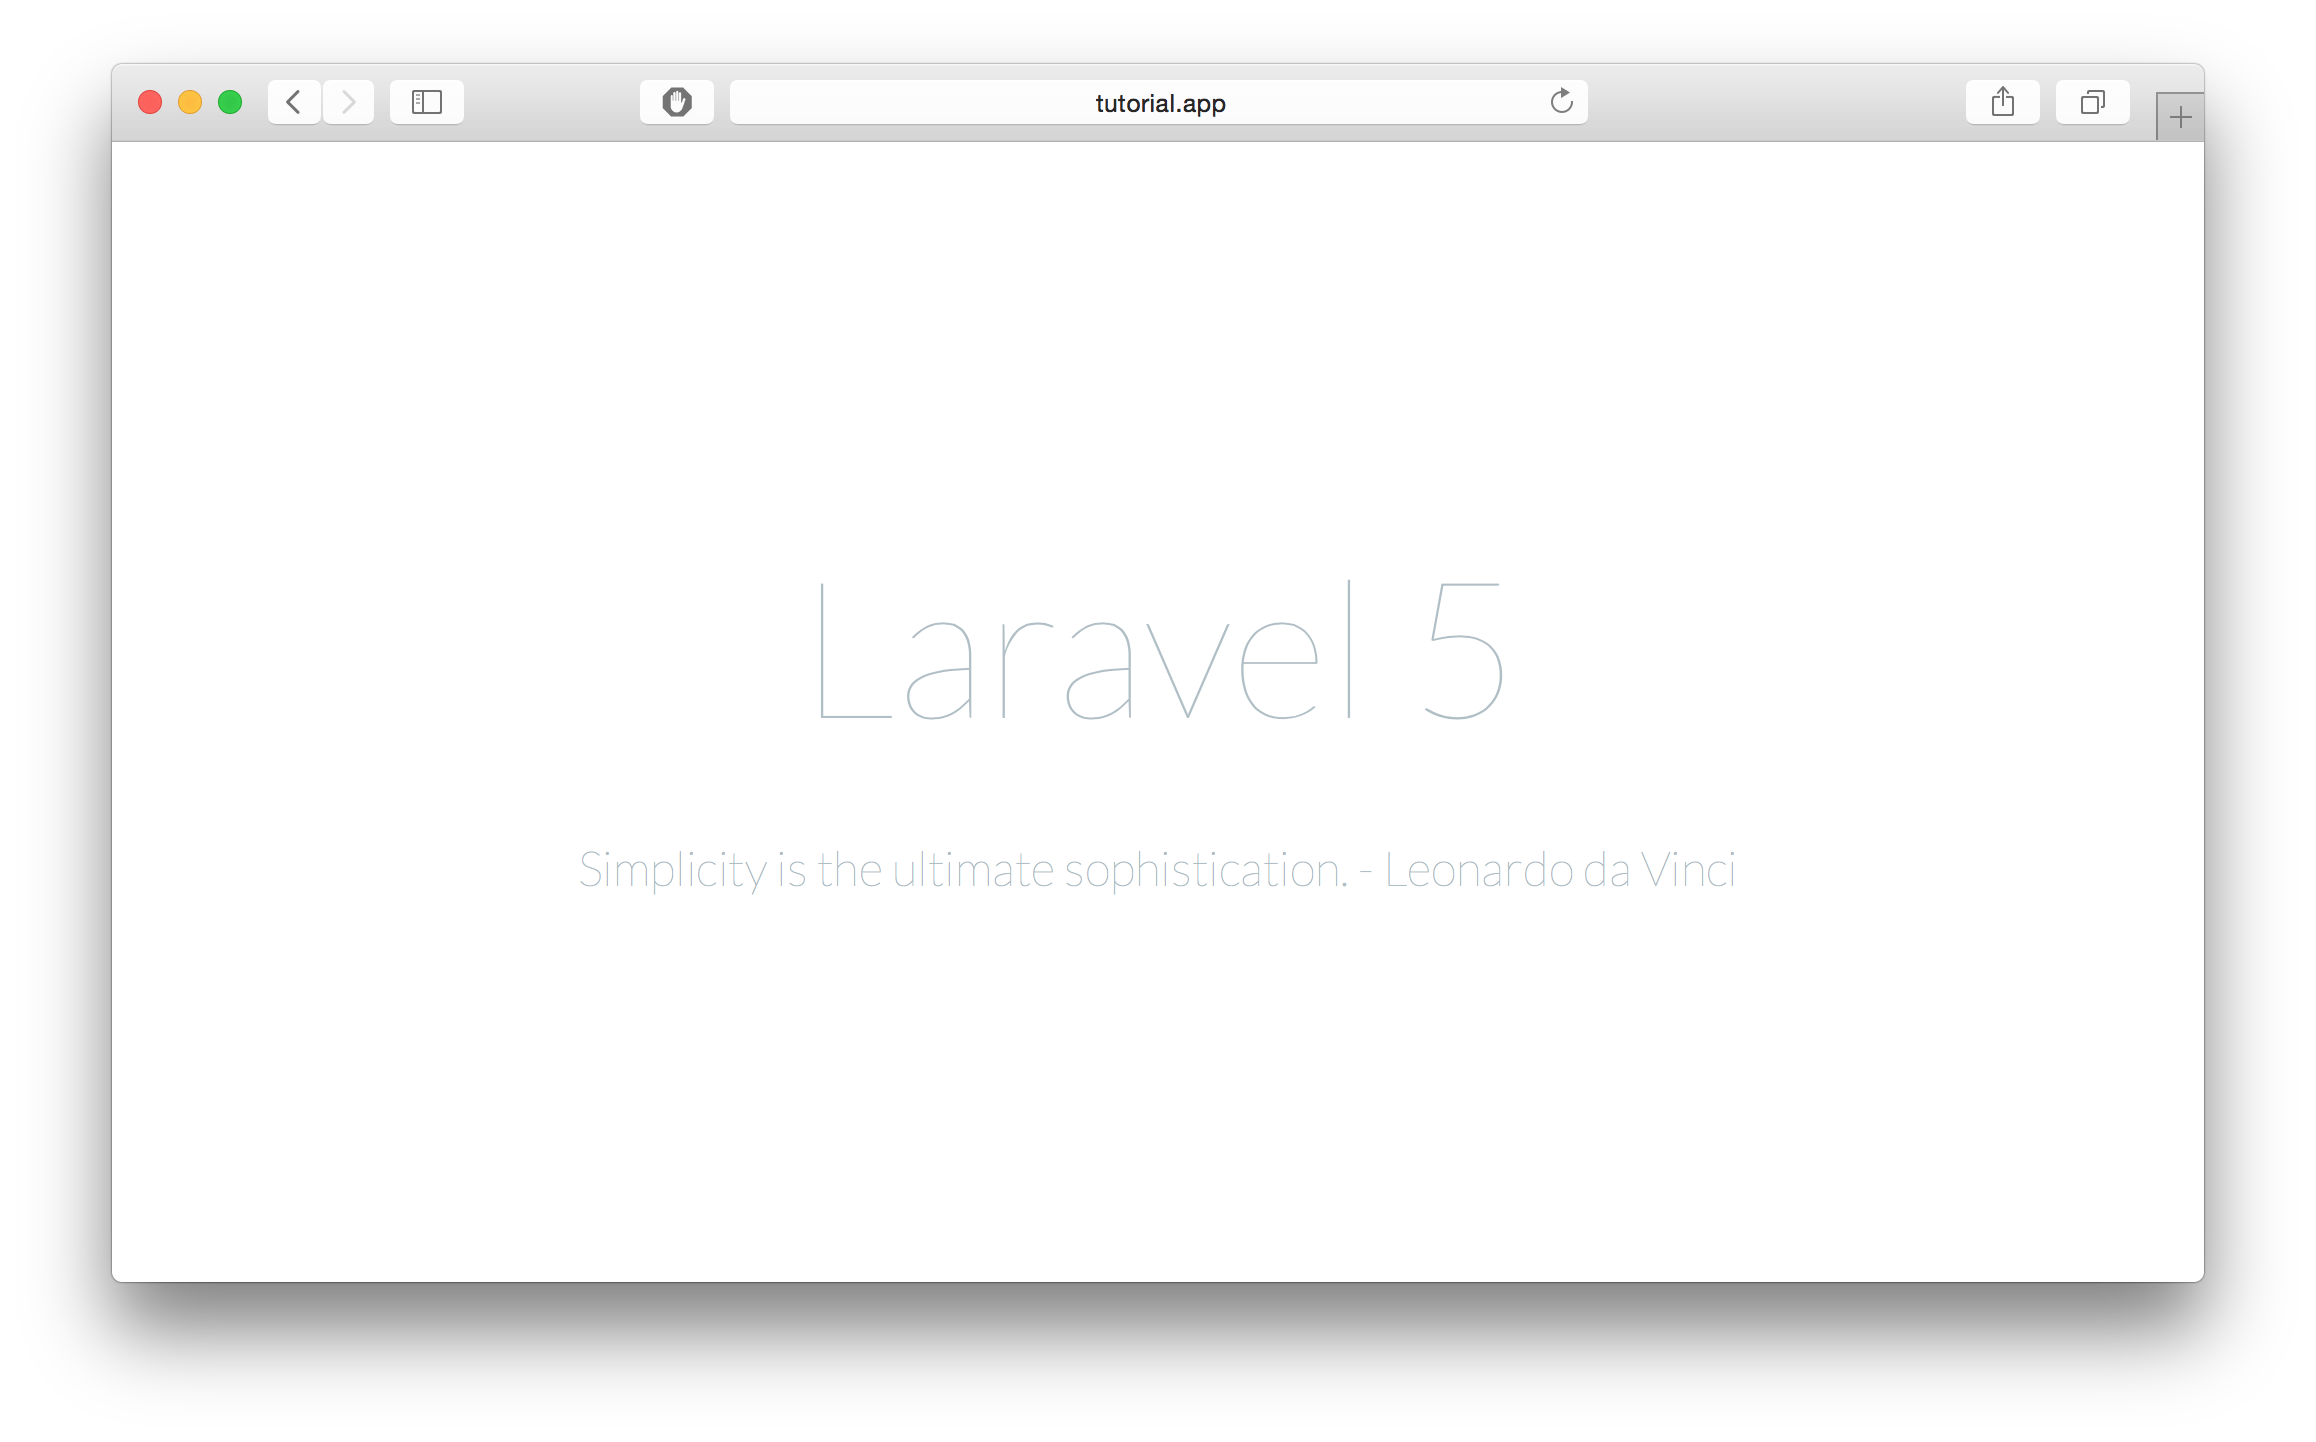 Laravel Welcome Page